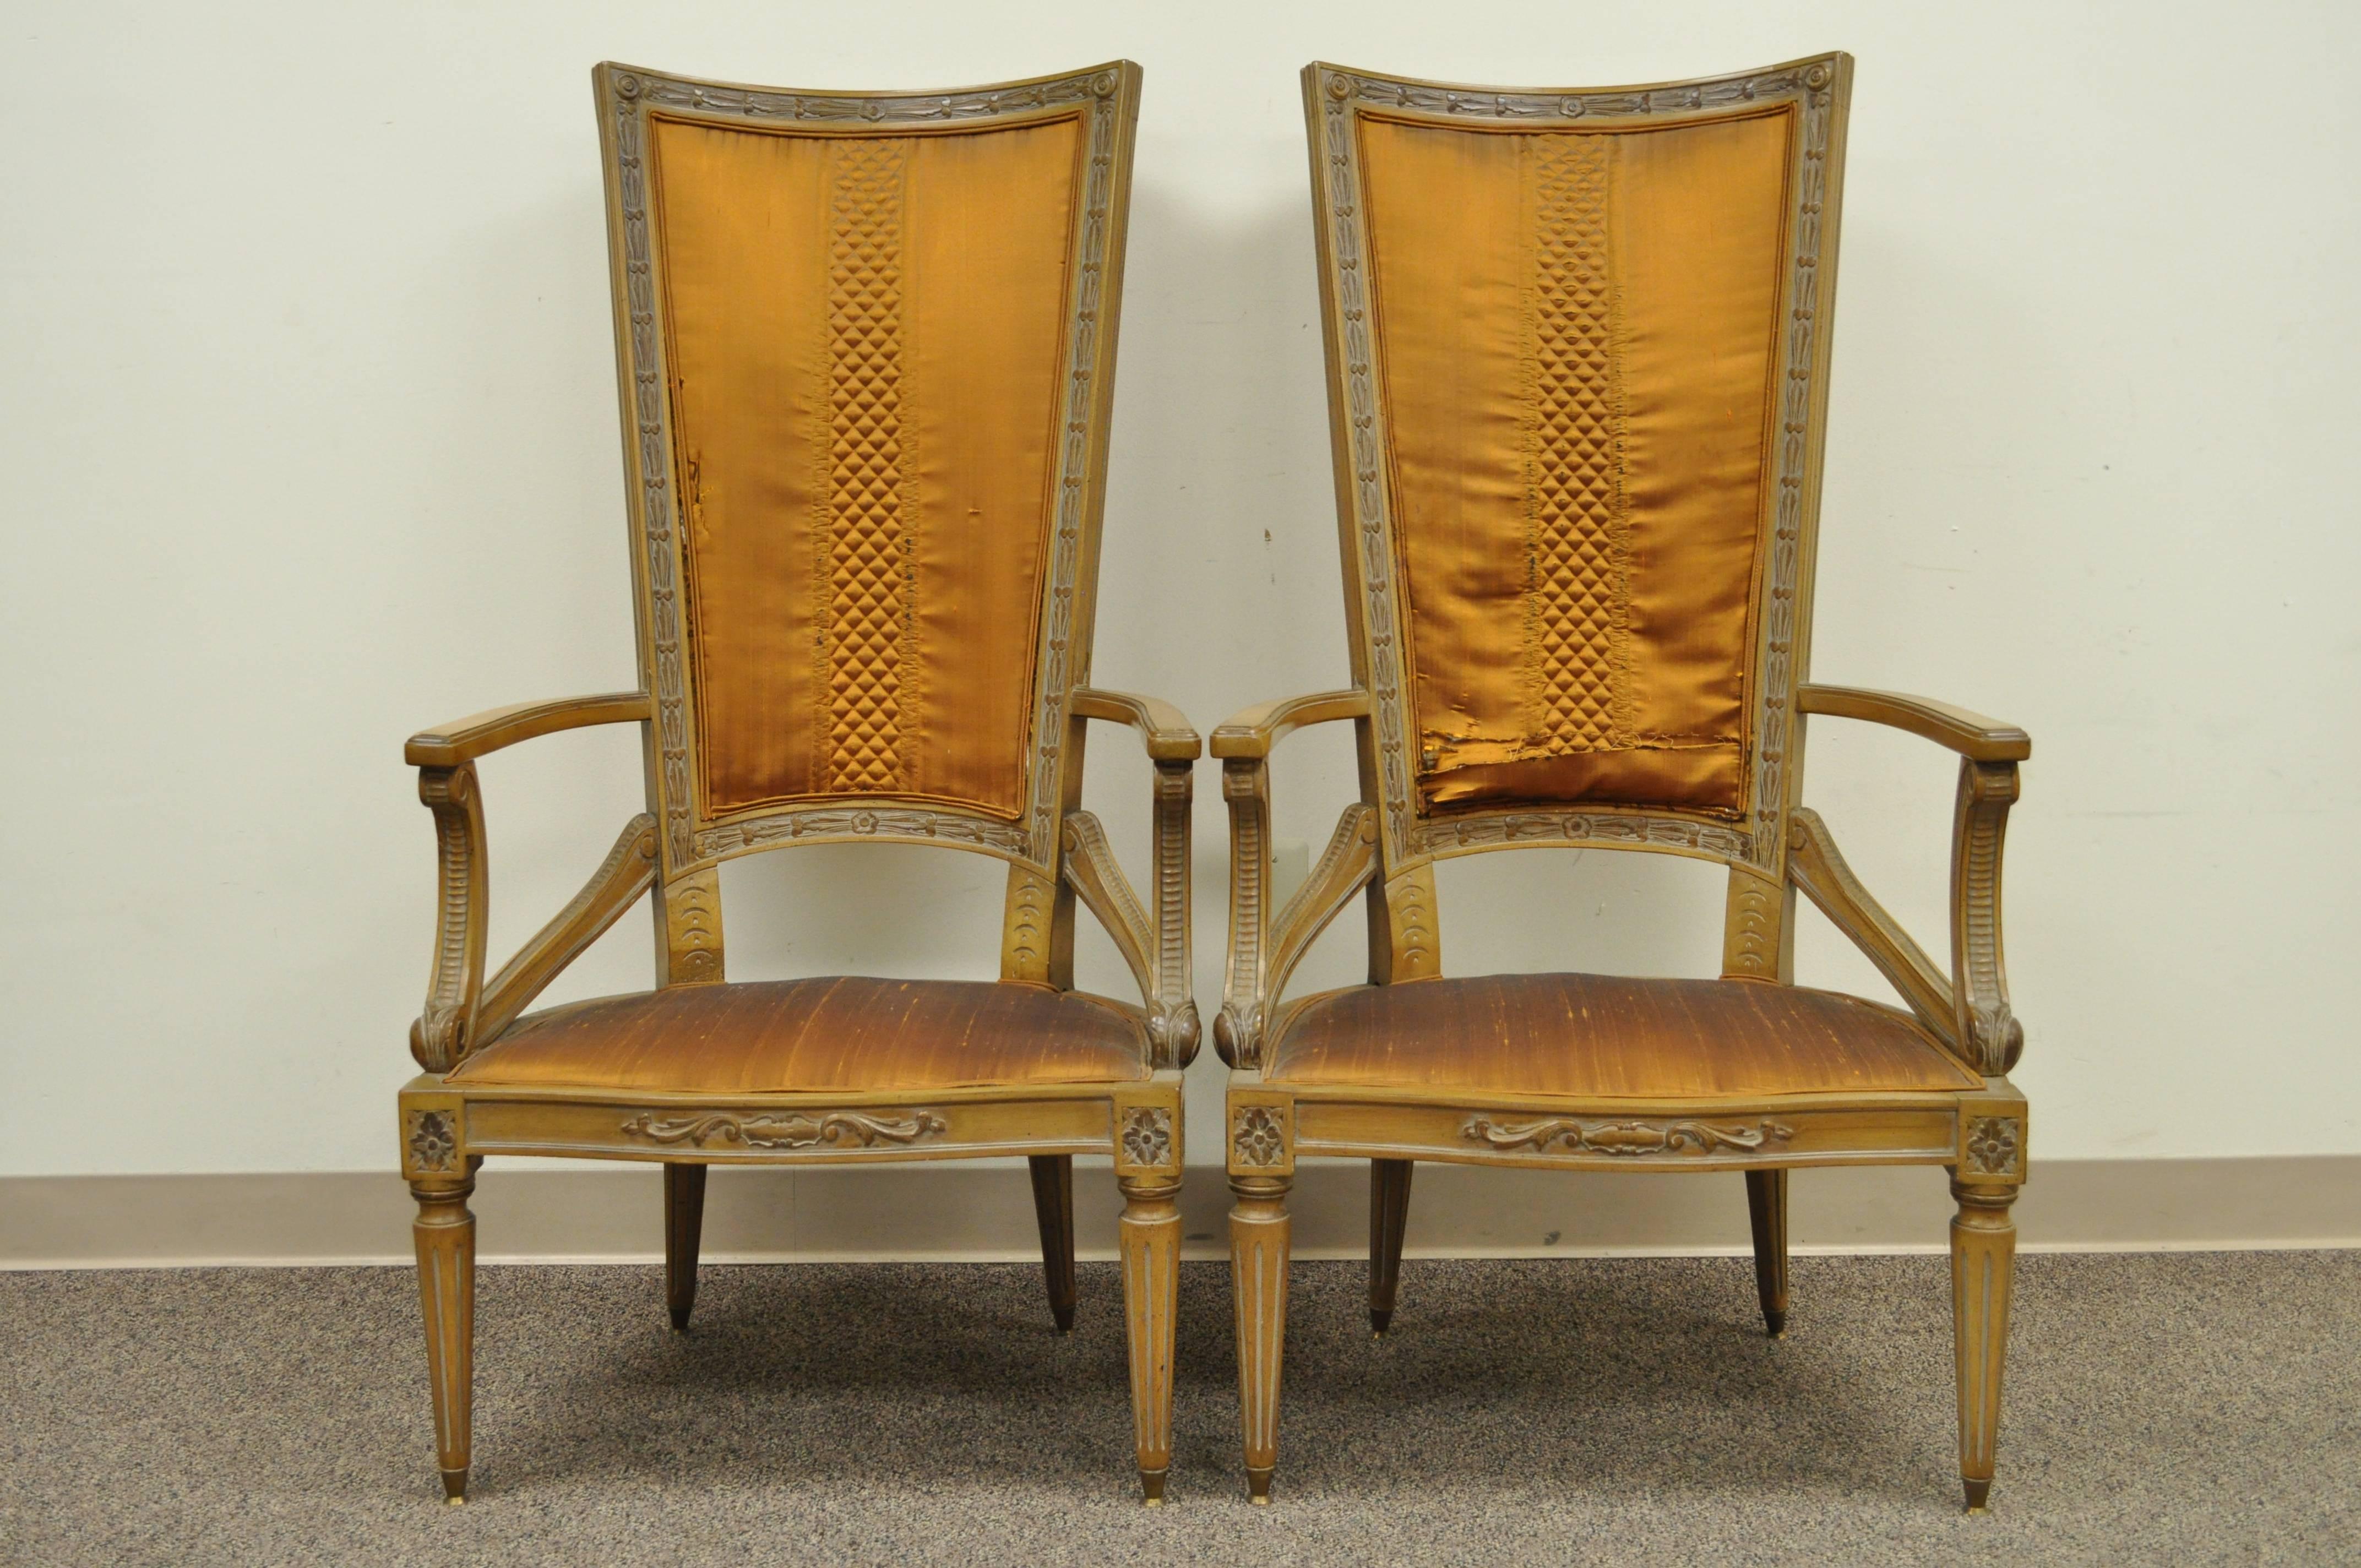 Stunning pair of vintage Hollywood Regency tall back fireside armchairs. The pair features shapely carved open frames, reeded and tapered legs, brass capped feet, and great form. The maker is unconfirmed but the quality and design is very similar to